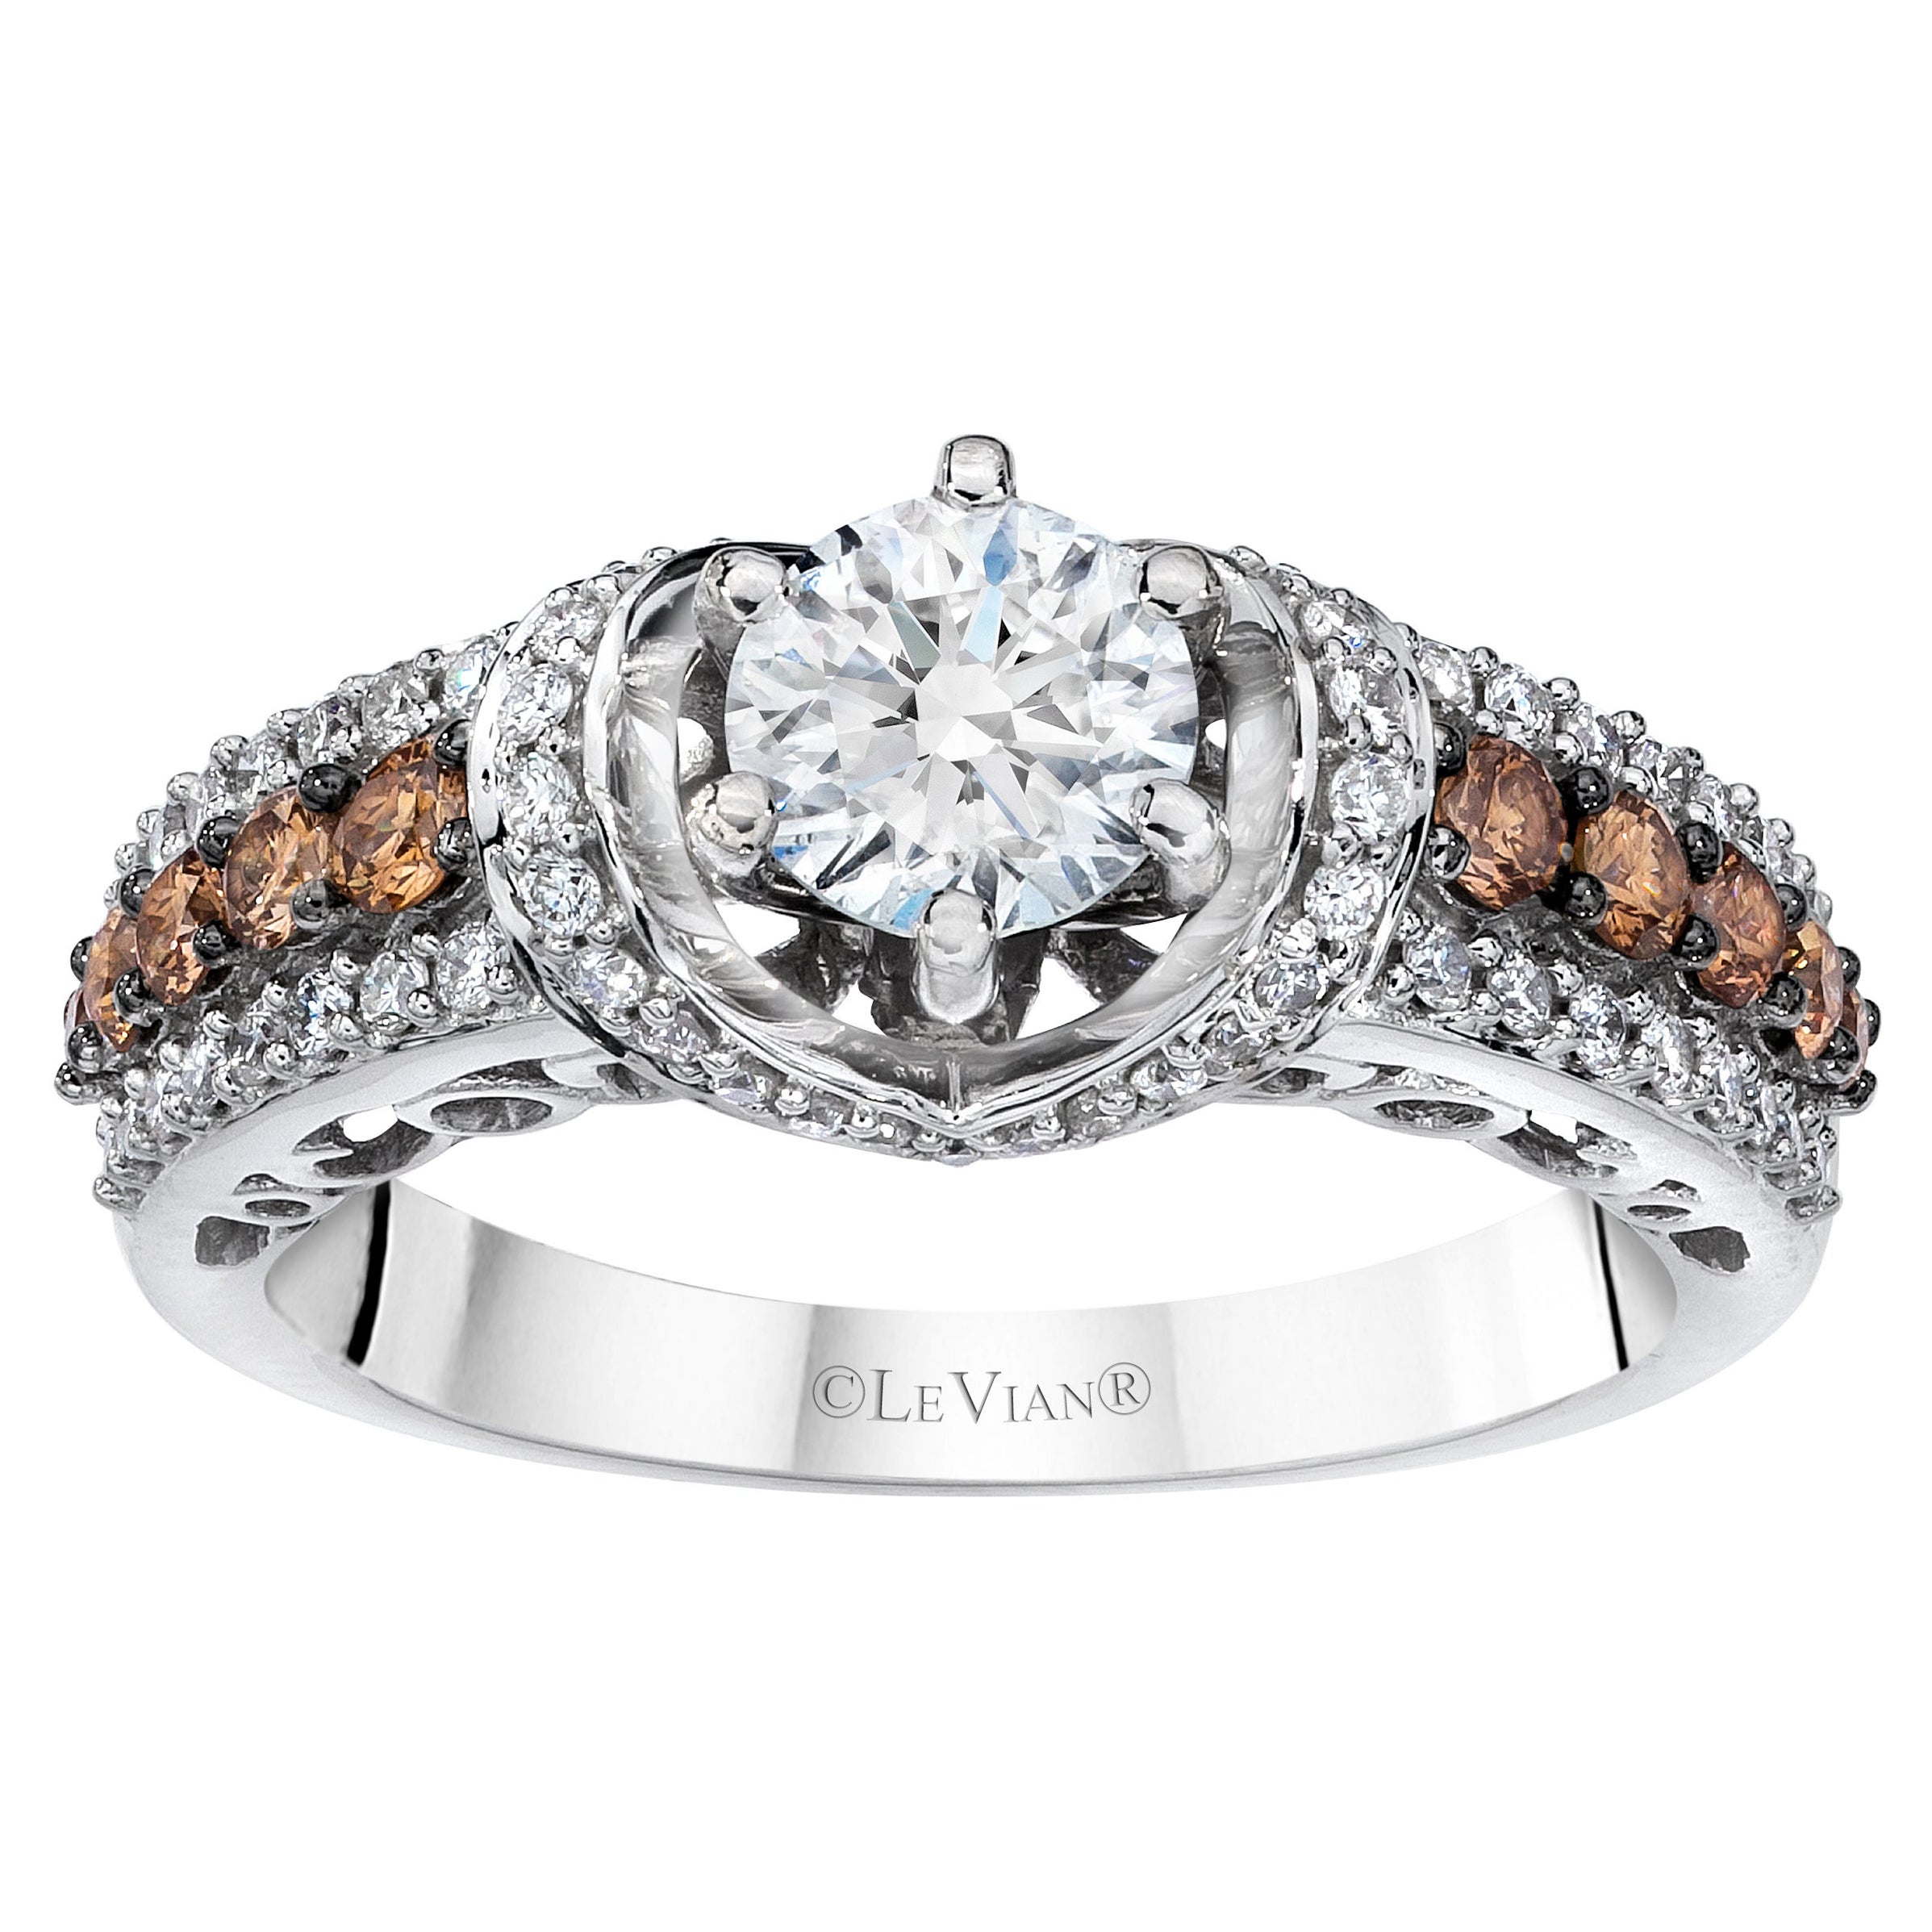 LeVian 14K White Gold Round Chocolate Brown Diamond Cocktail Bridal Wedding Ring For Sale